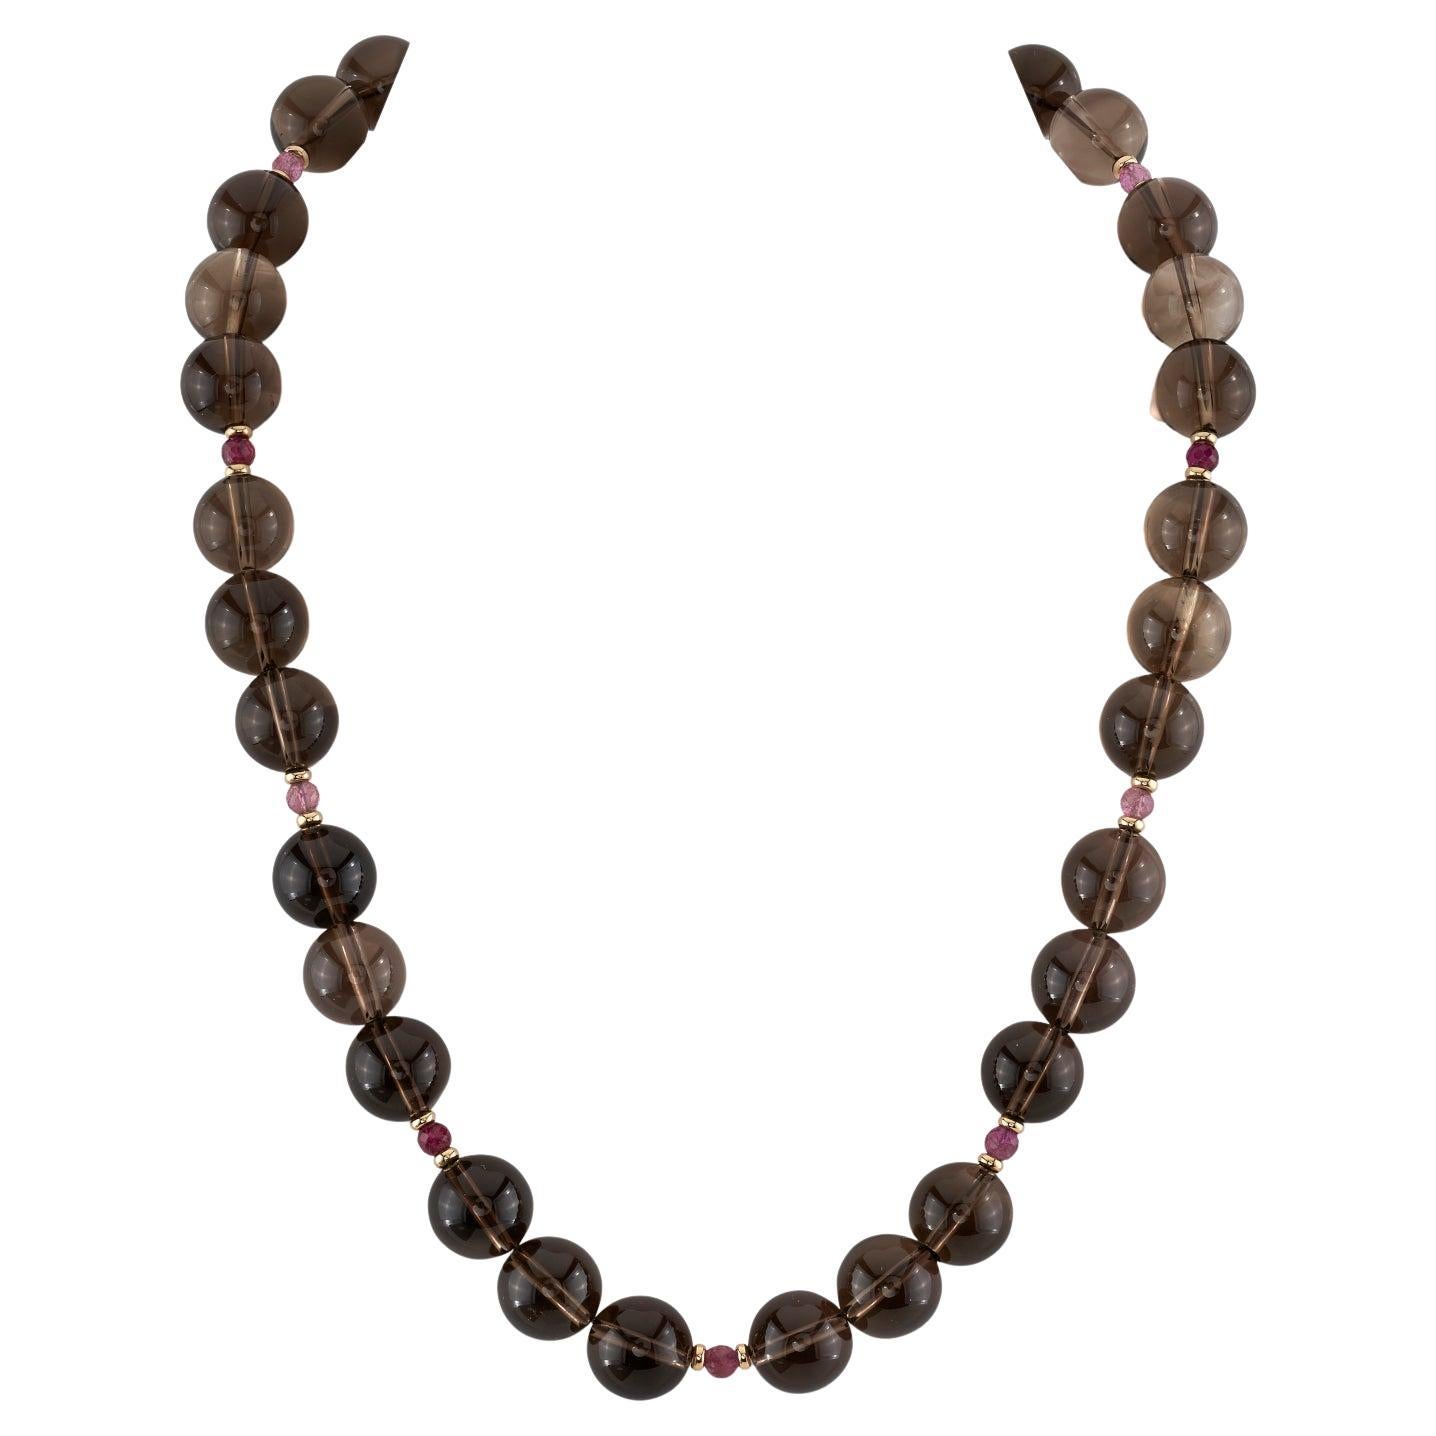 12mm Smoky Quartz and Pink Tourmaline Beaded Necklace with Yellow Gold Accents